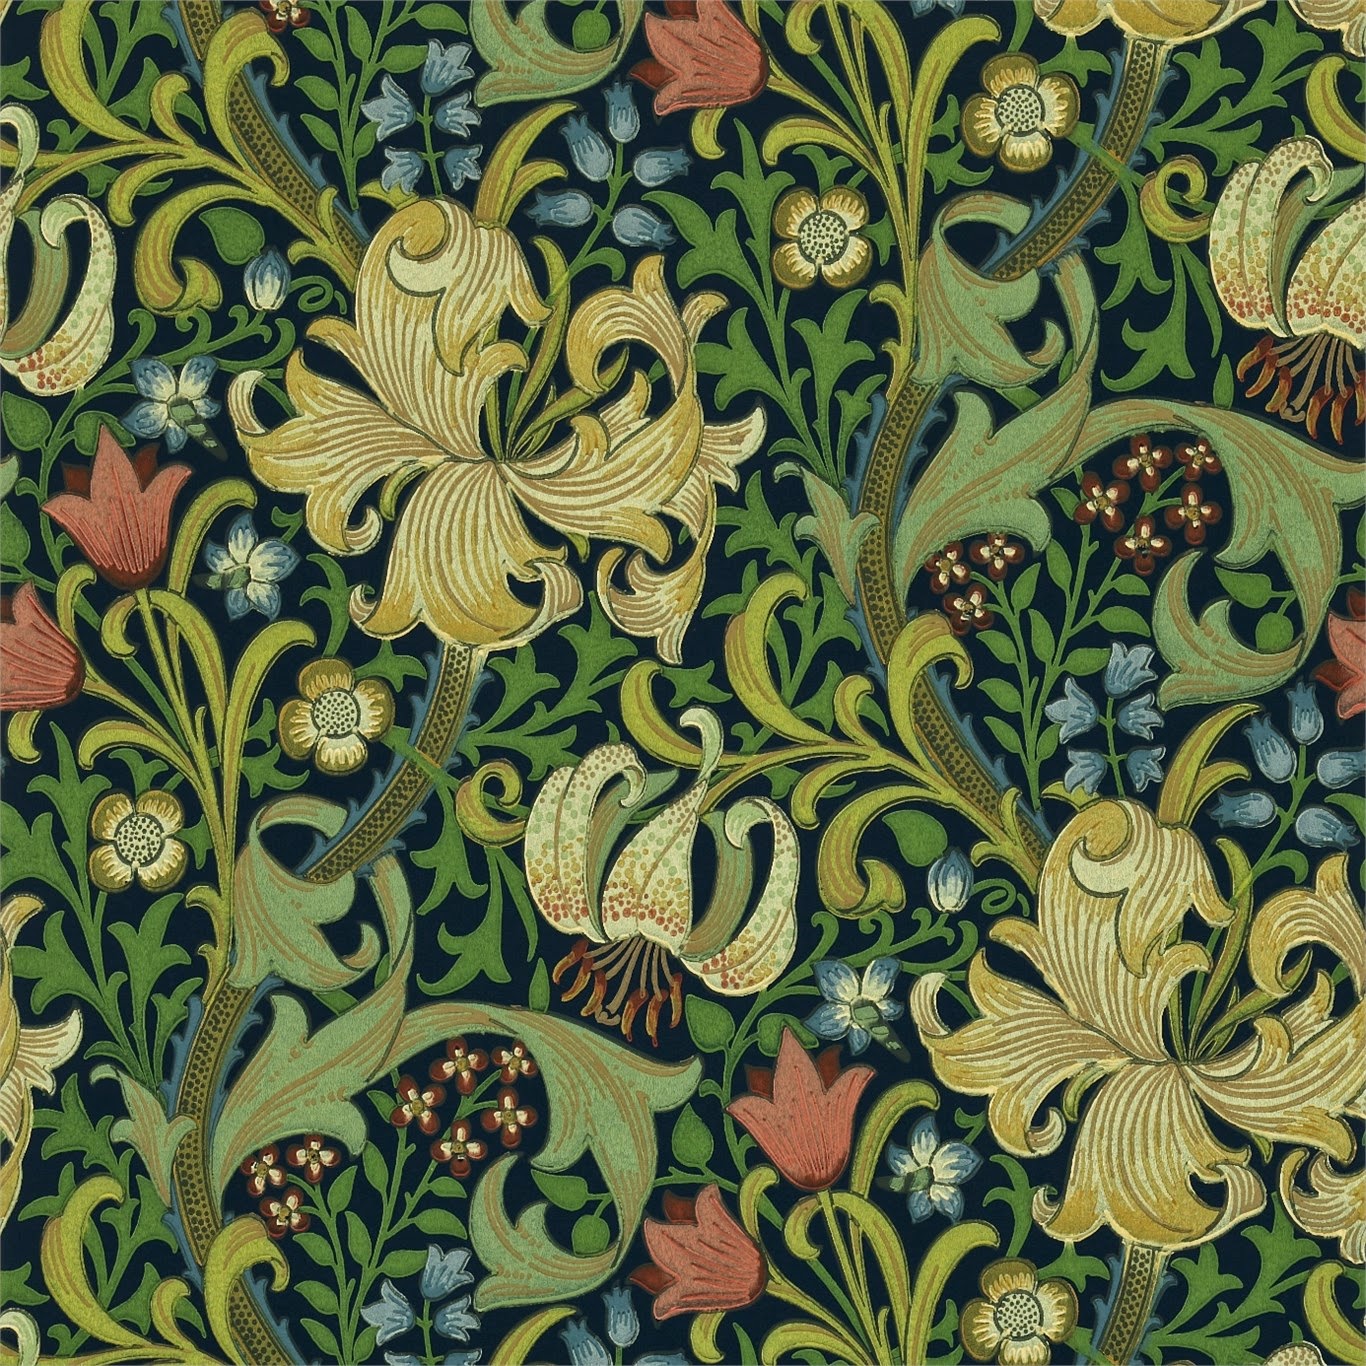 Style at a Glance: Arts and Crafts Movement - L' Essenziale